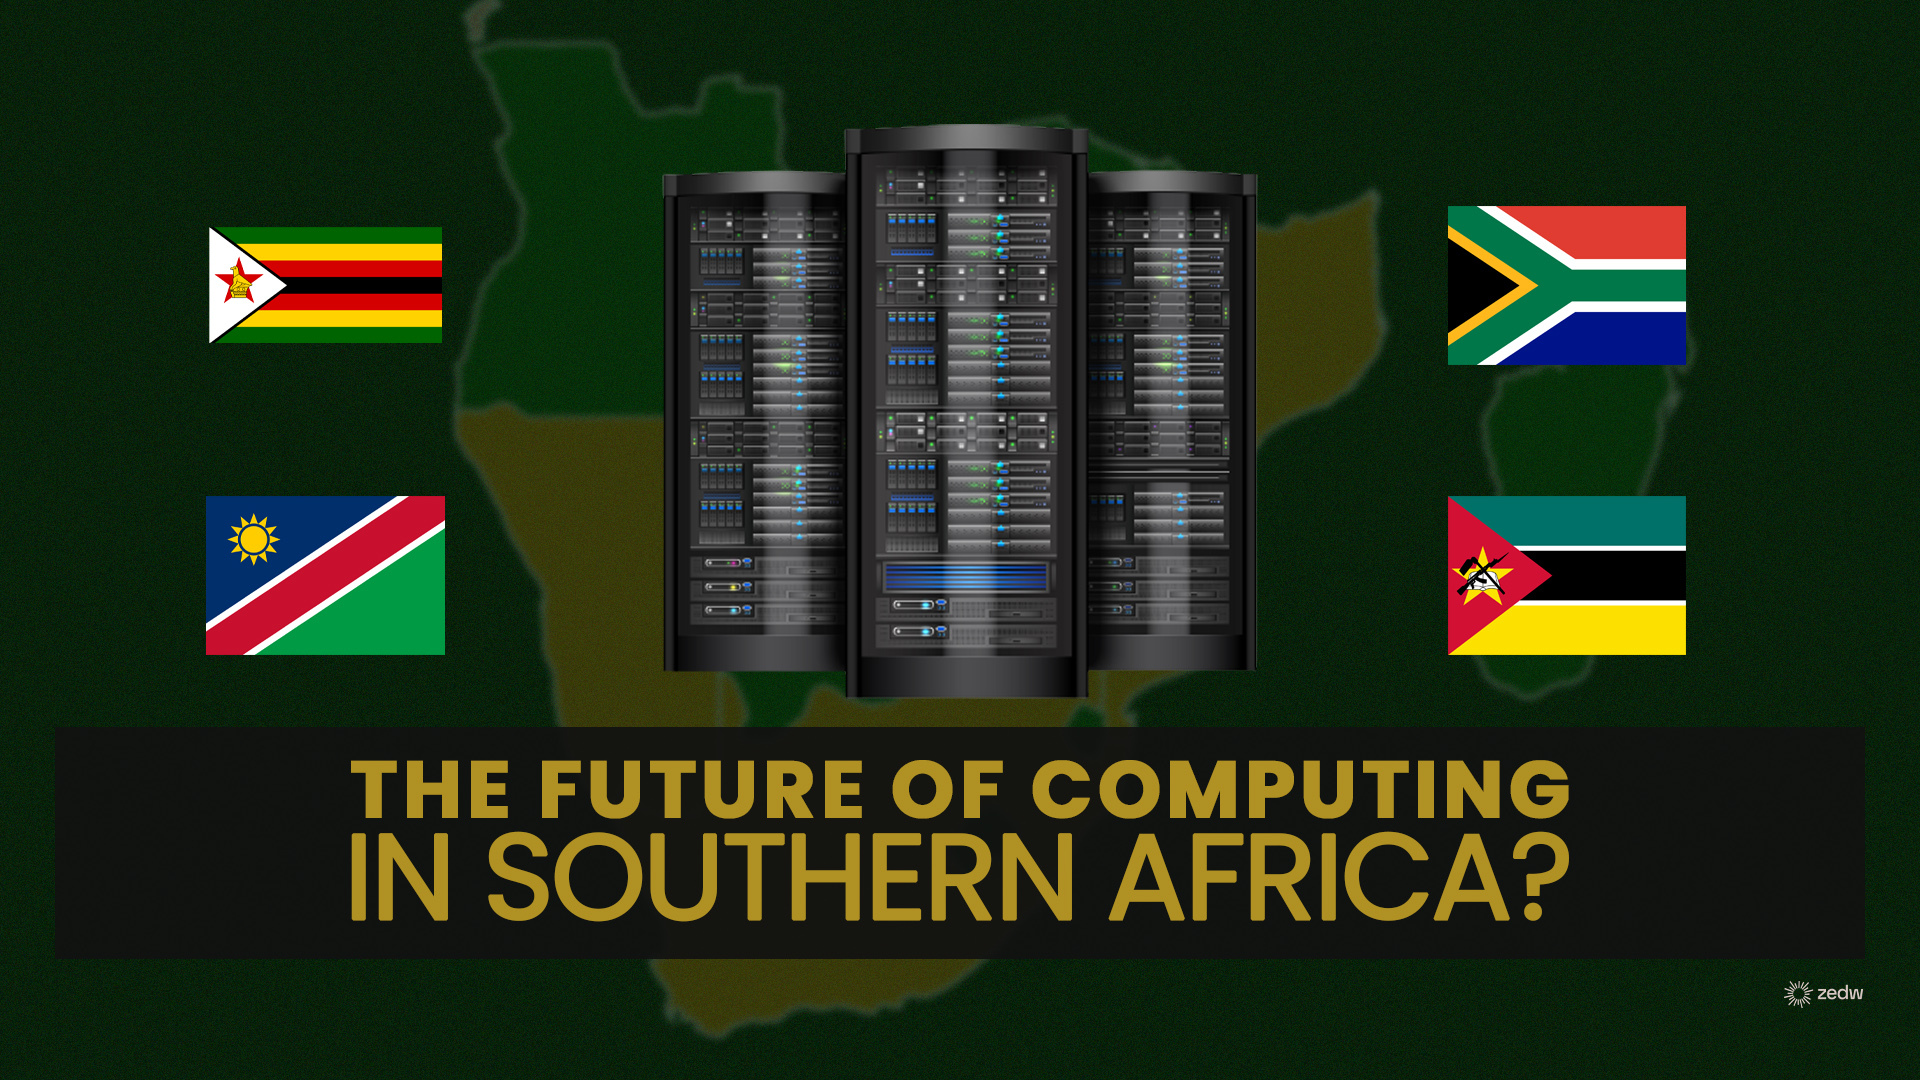 Taking root or passing trend: Southern Africa’s high-performance computing industry